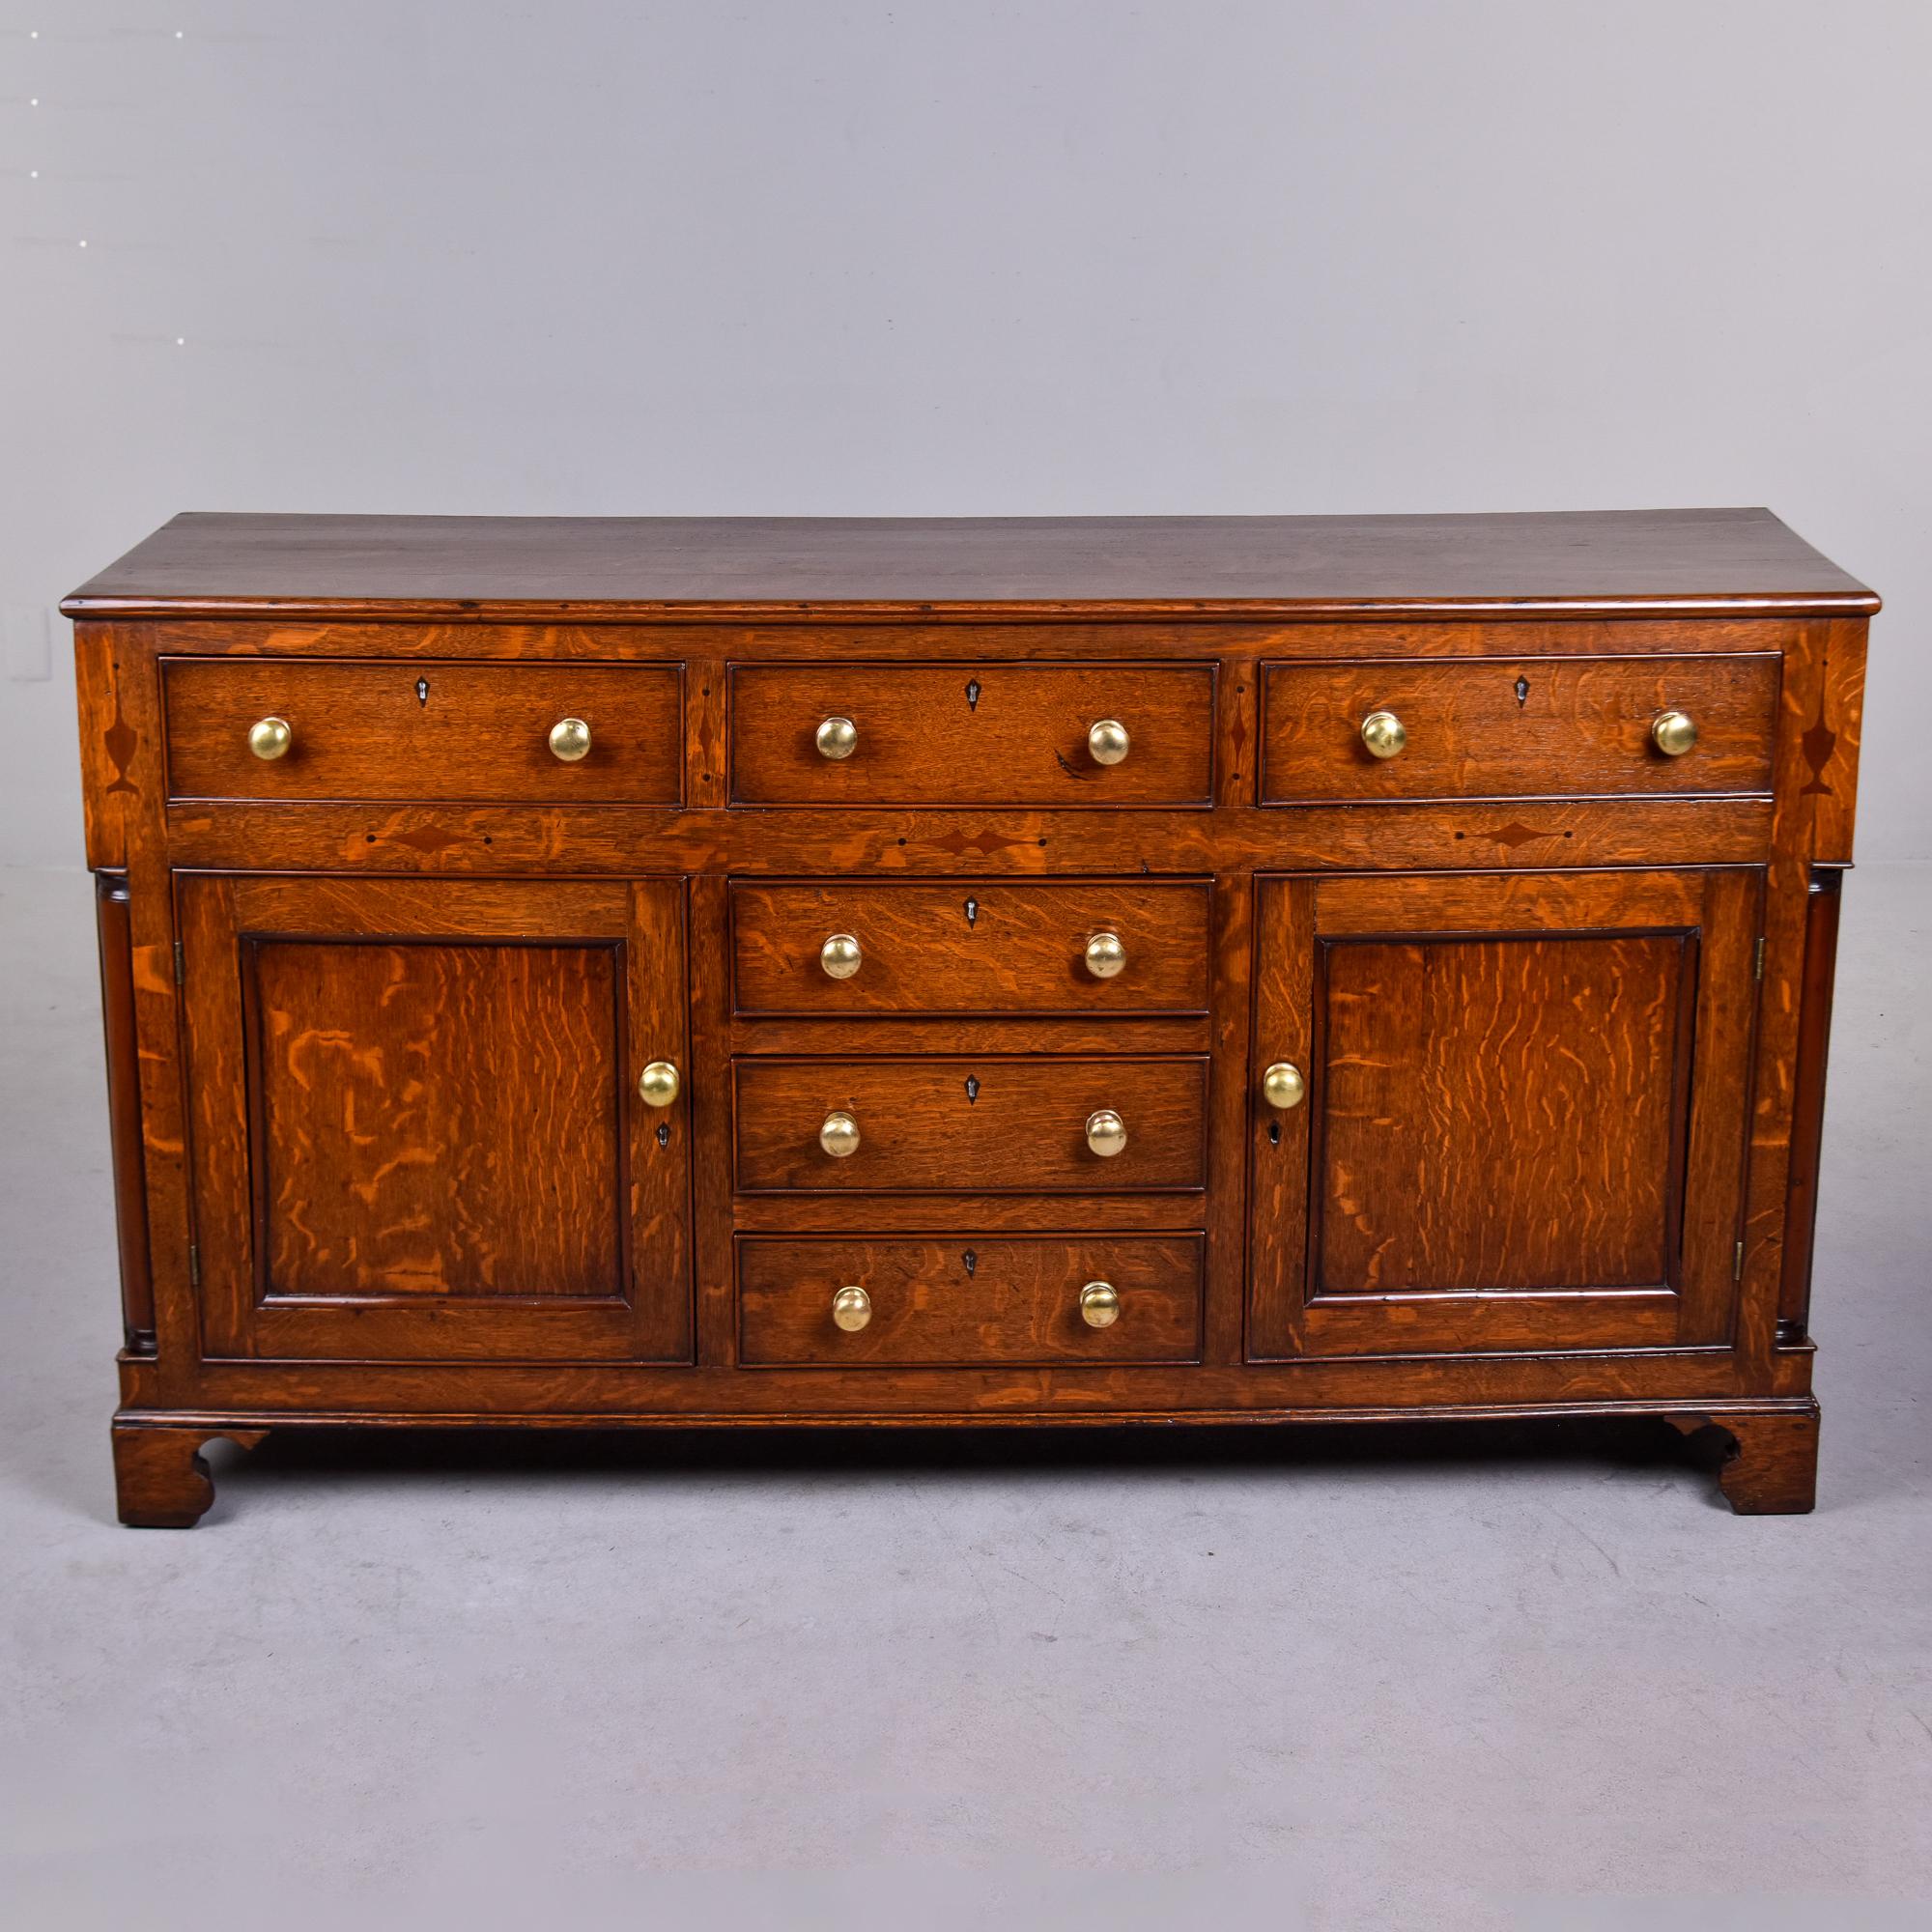 Found in England, this circa 1860s oak chest has 6 drawers and 2 cabinets with brass hardware. This piece was originally the base and would have had an additional, taller cabinet that sat on top. Beautifully constructed with nicely figured oak,